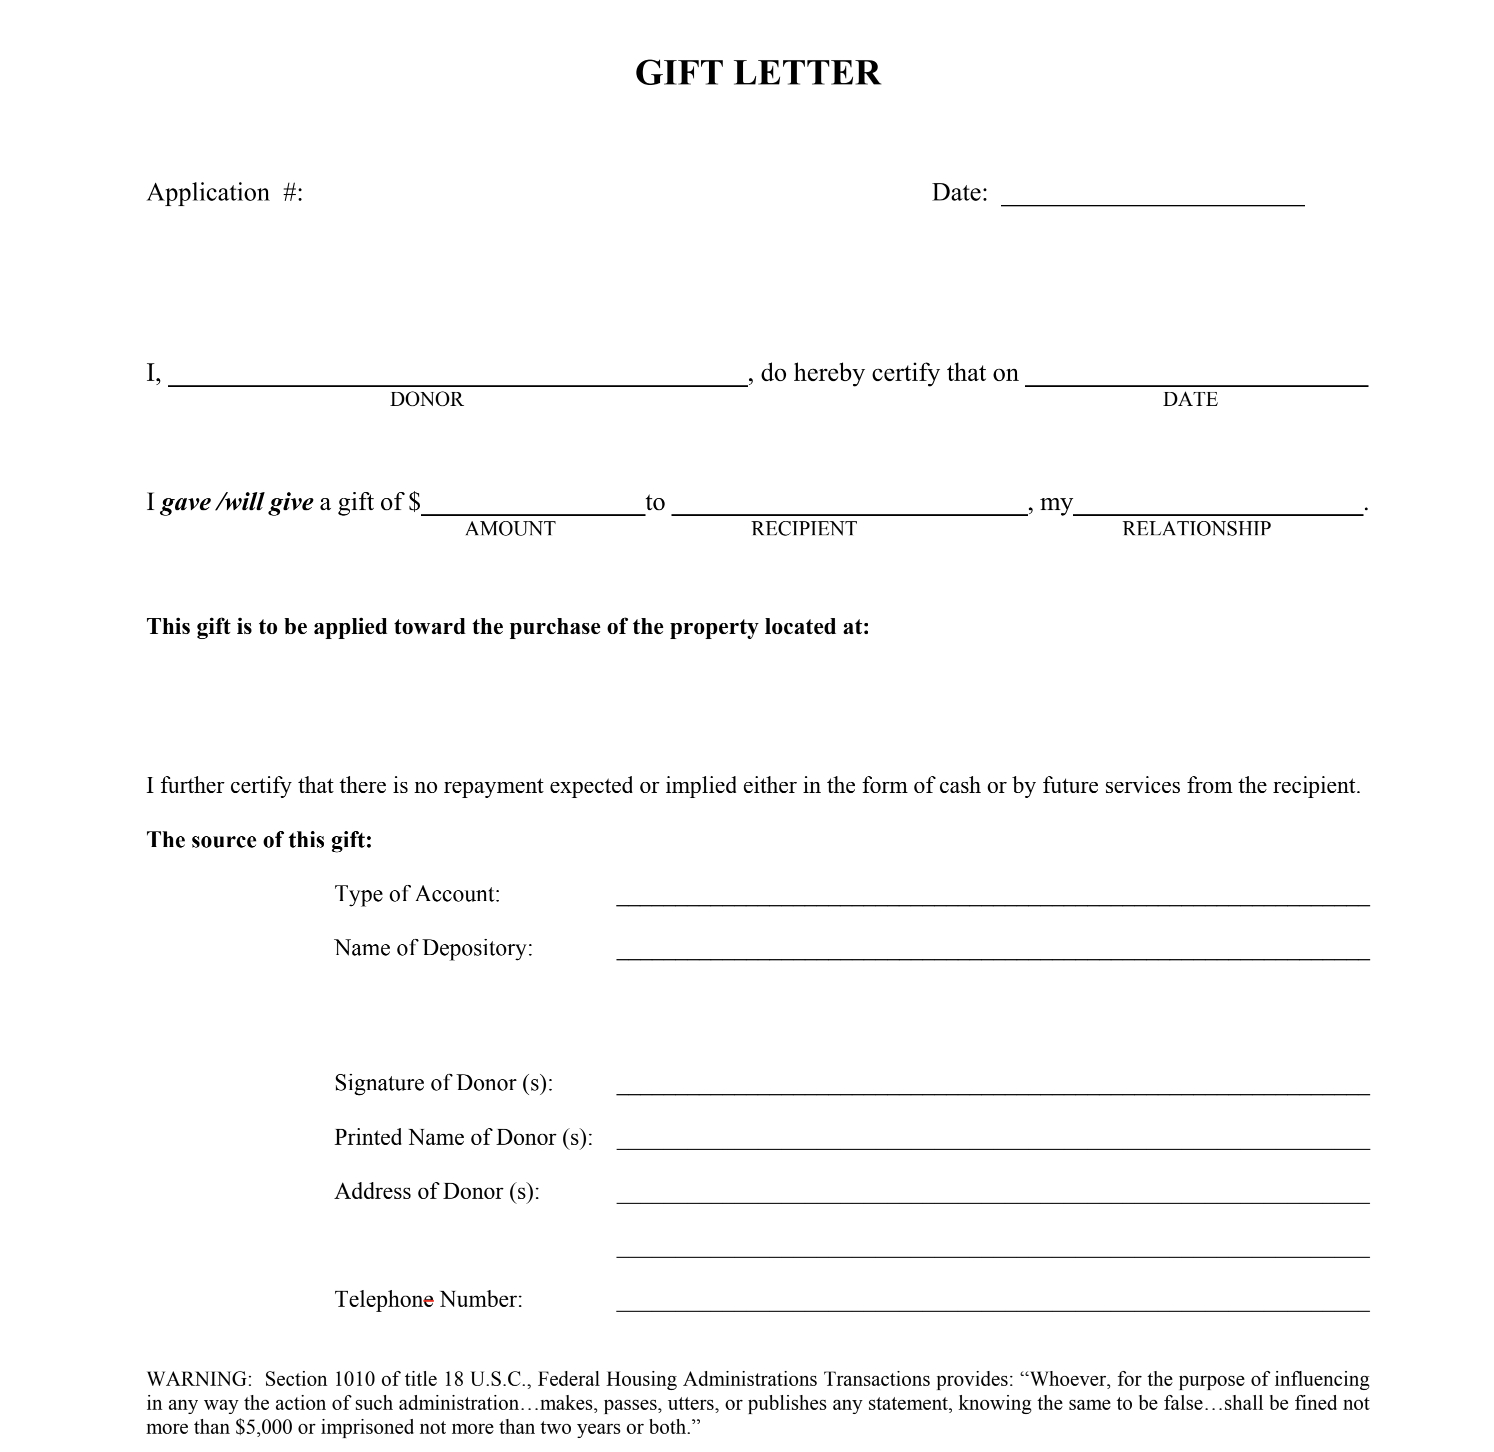 How To Use A Gift Letter For A Home Down Payment Within Mortgage Gift Letter Template